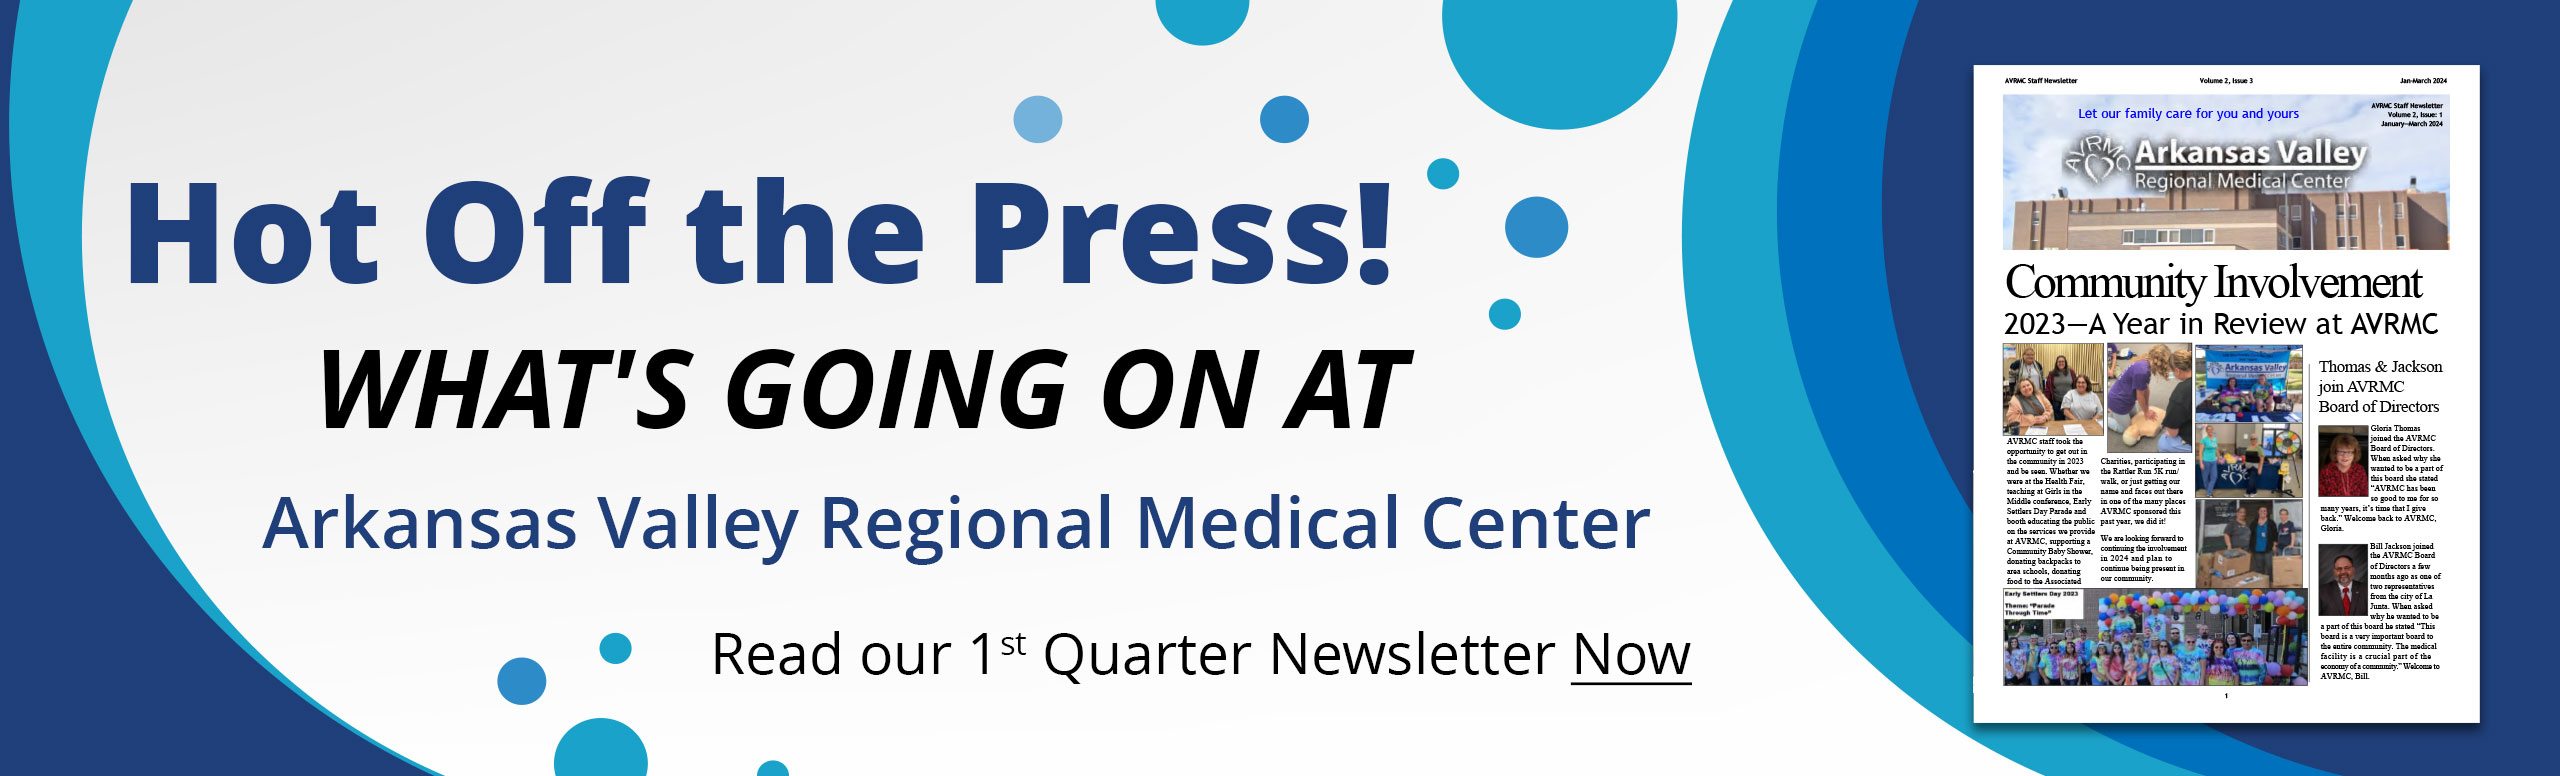 Hot Off the Press!  What's going on at Arkansas Valley Regional Medical Center....

Read our 1st Quarter Newsletter Now.